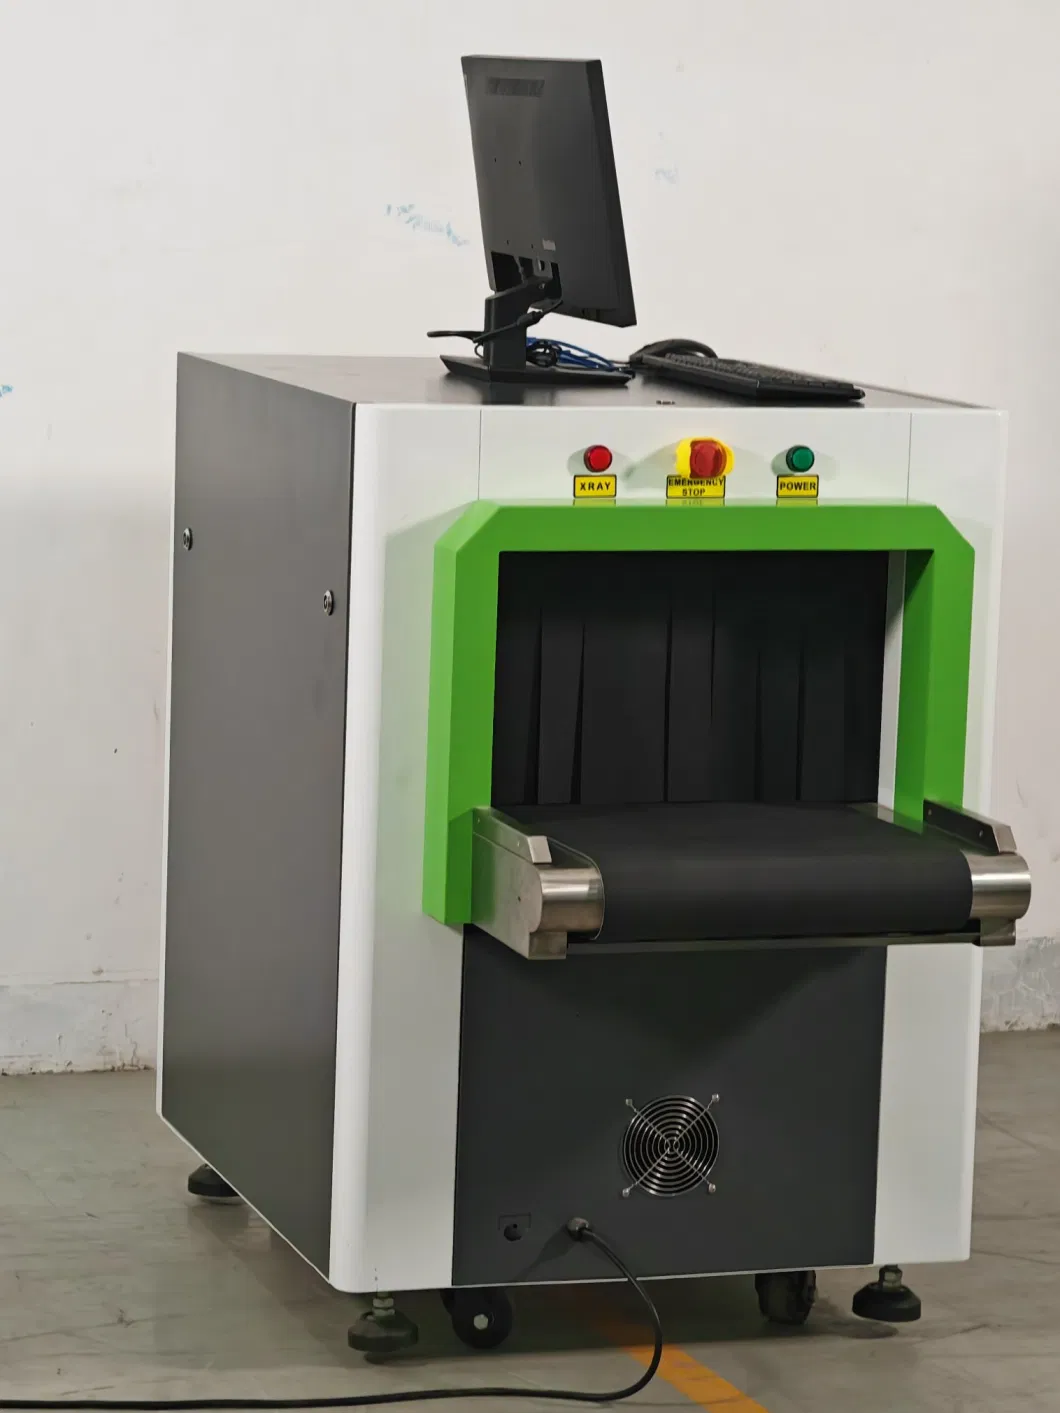 International Safety Standard X-ray Baggage Scanner, X-ray Inspection Machine, X-ray Scanning Machine 5030